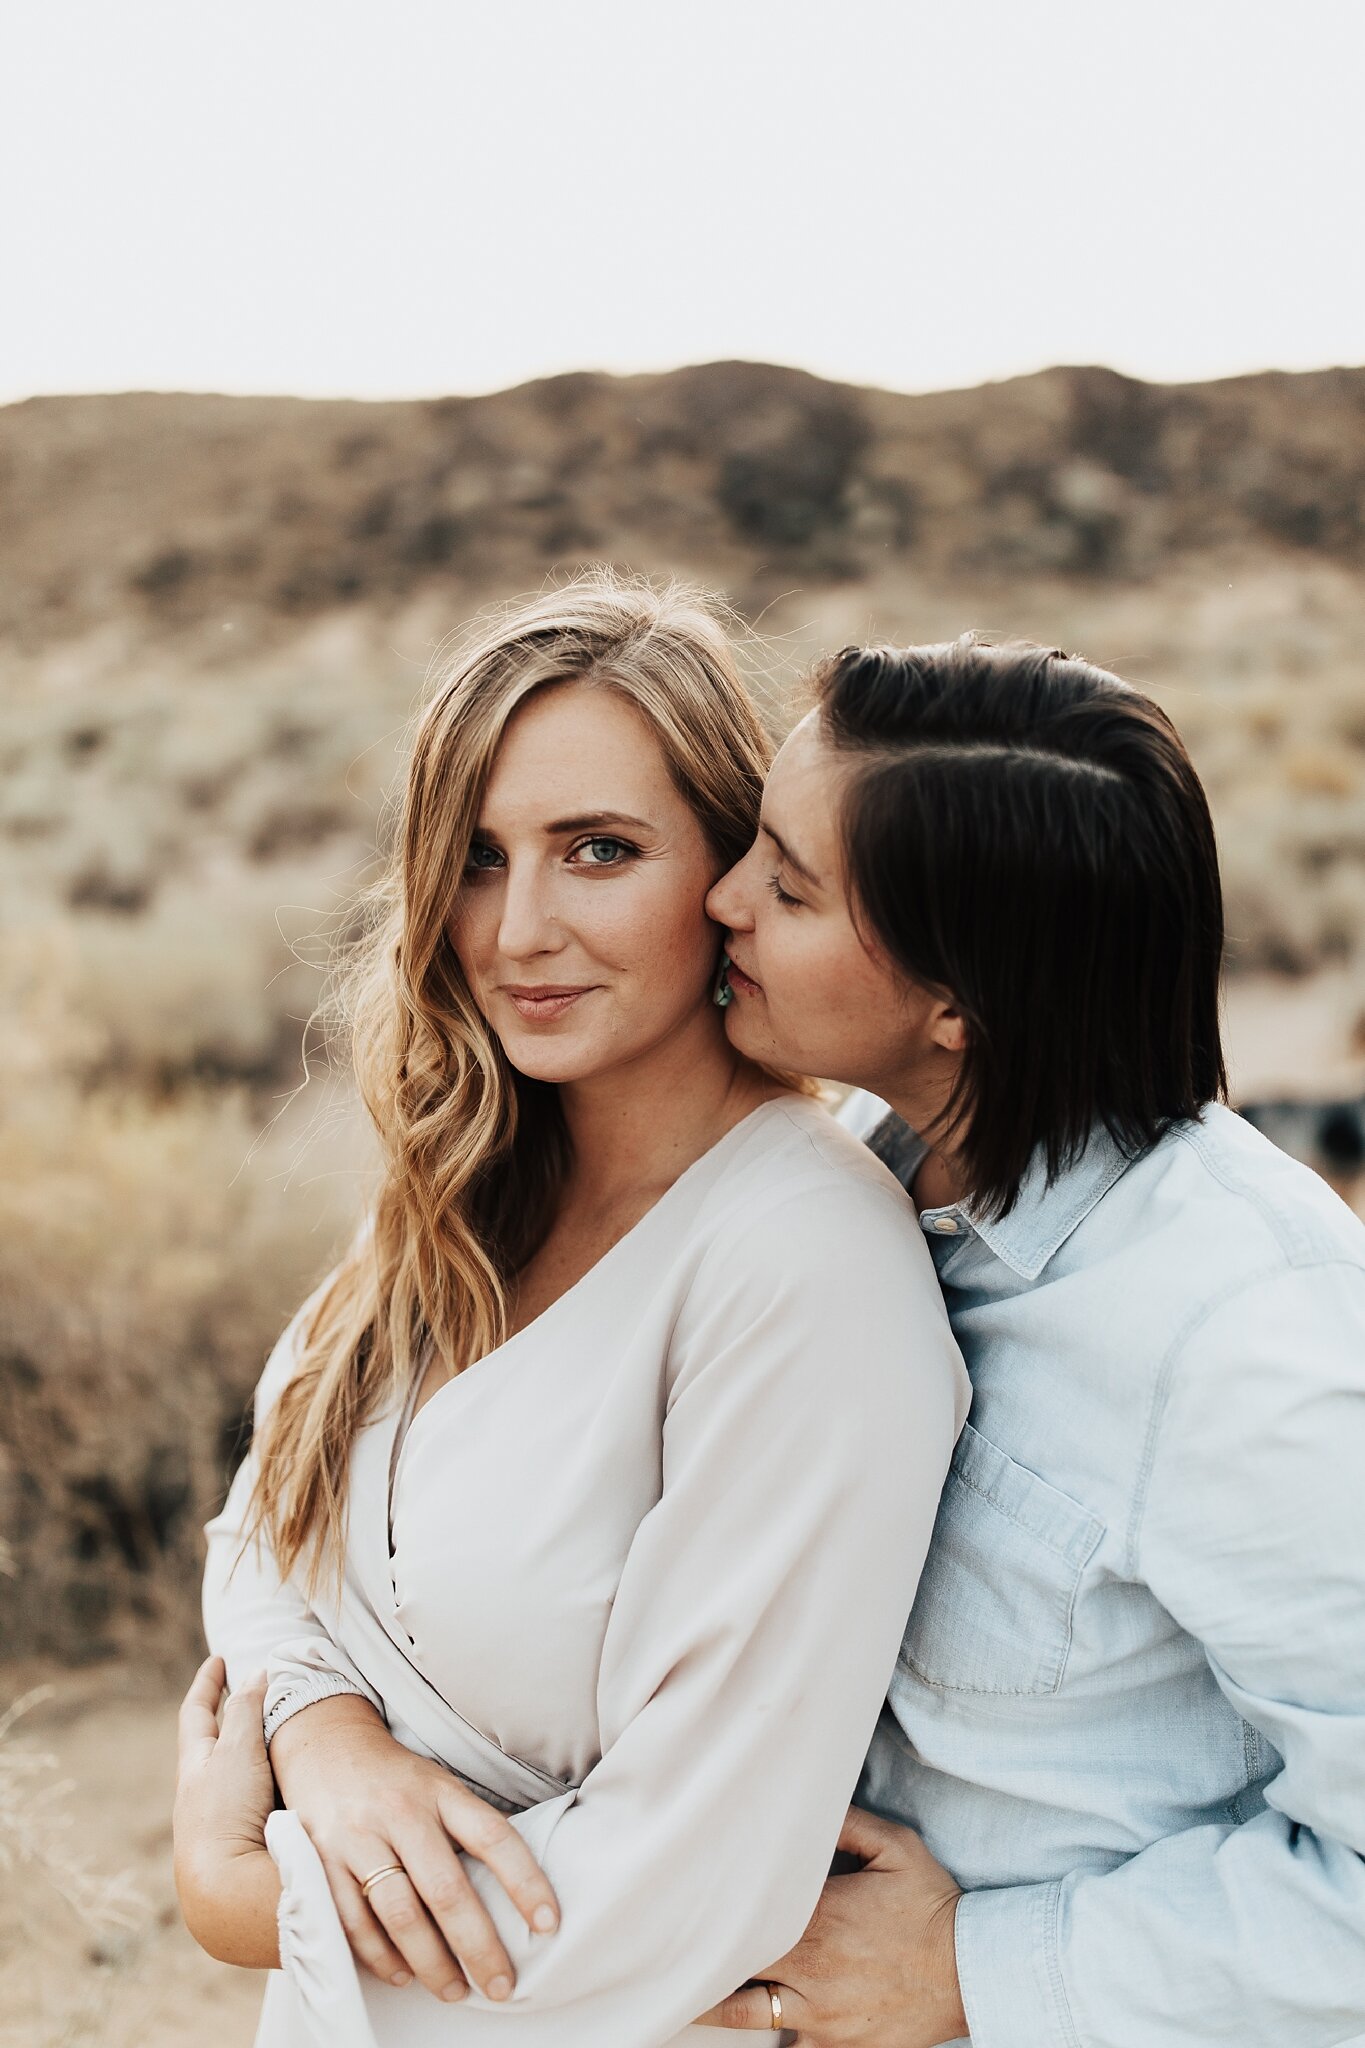 Cait + Lana, an Evening in the Desert — Alicia Lucia Photography ...